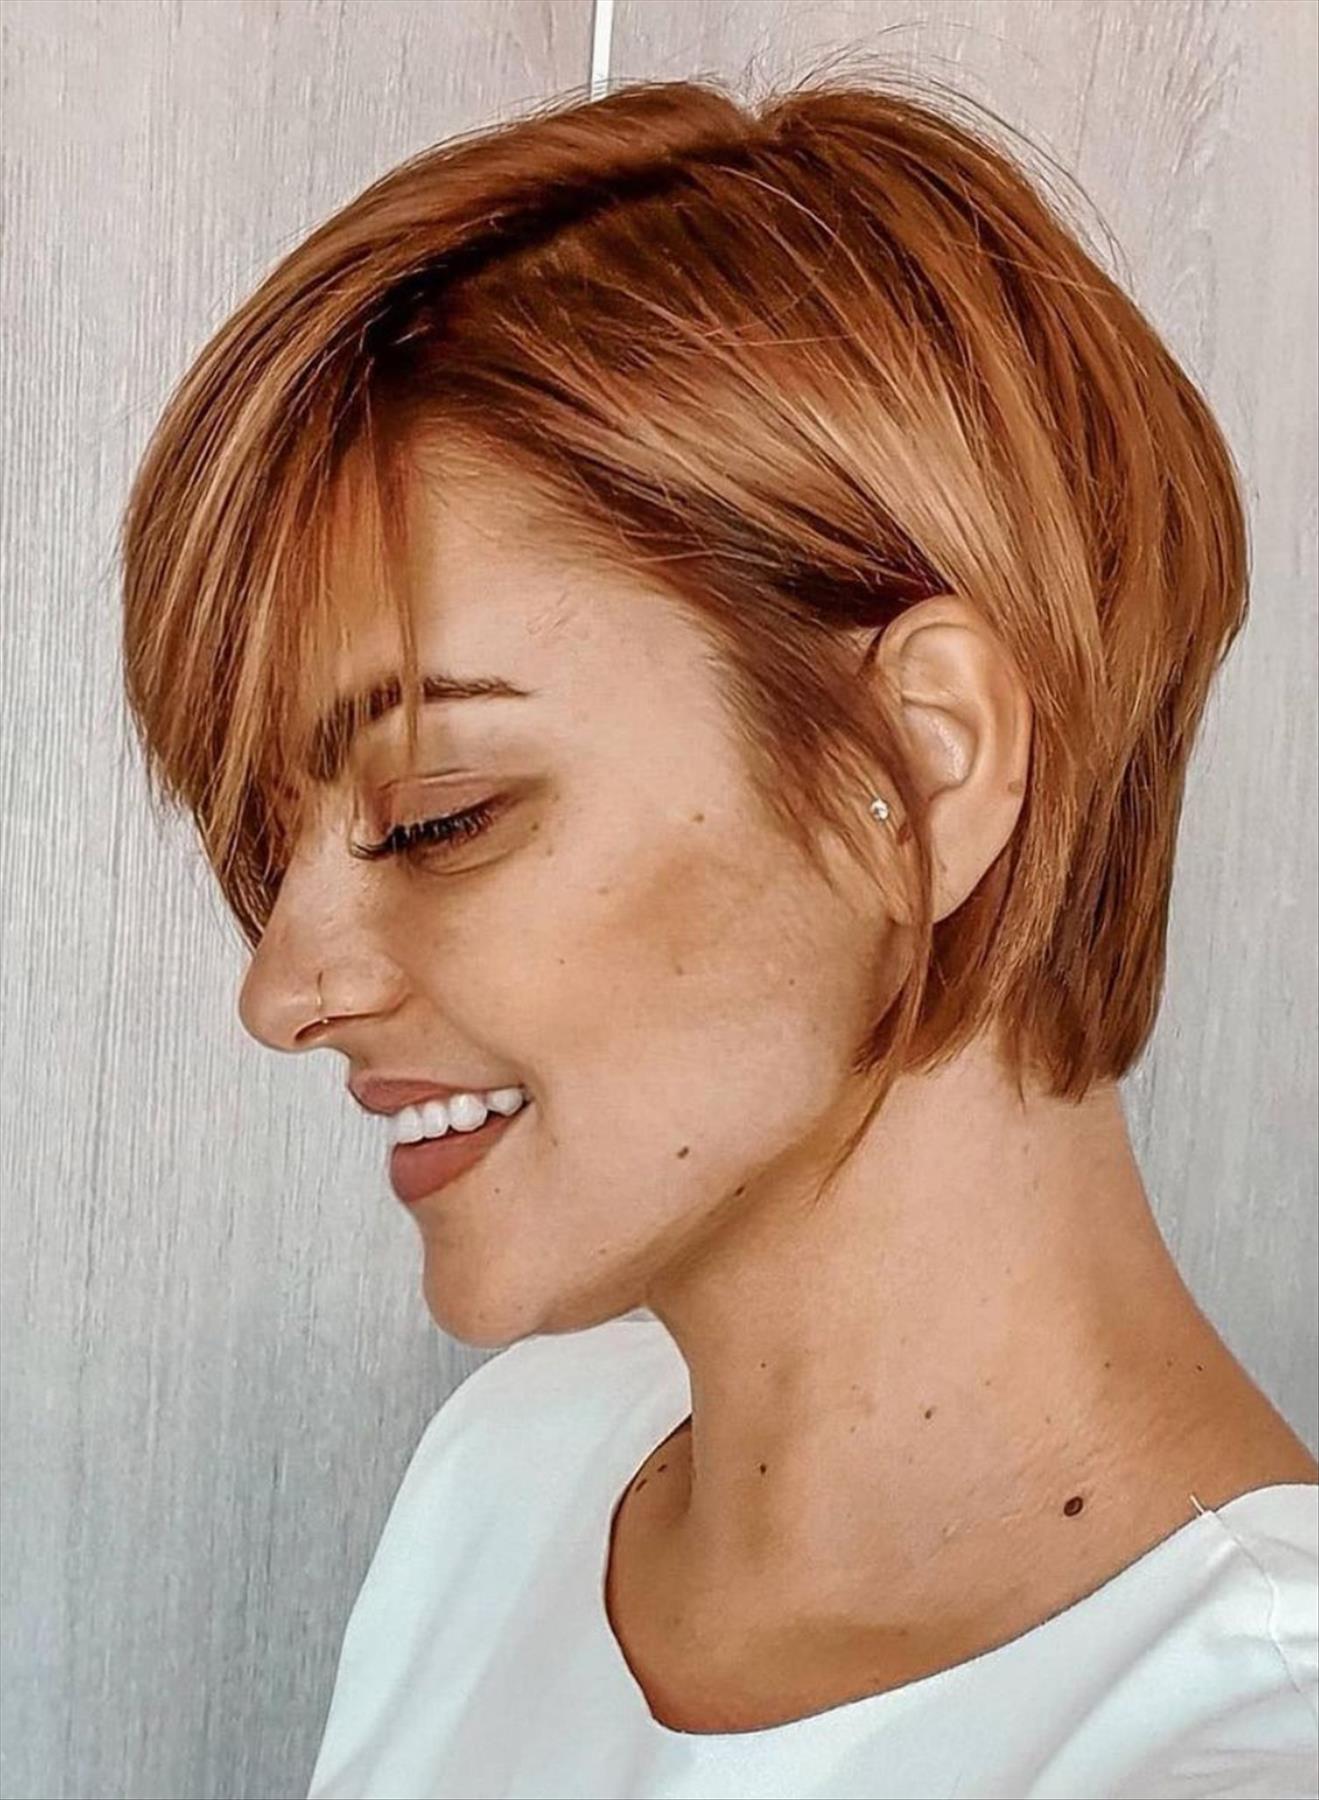 Cool short pixie hairstyles for women 2022 